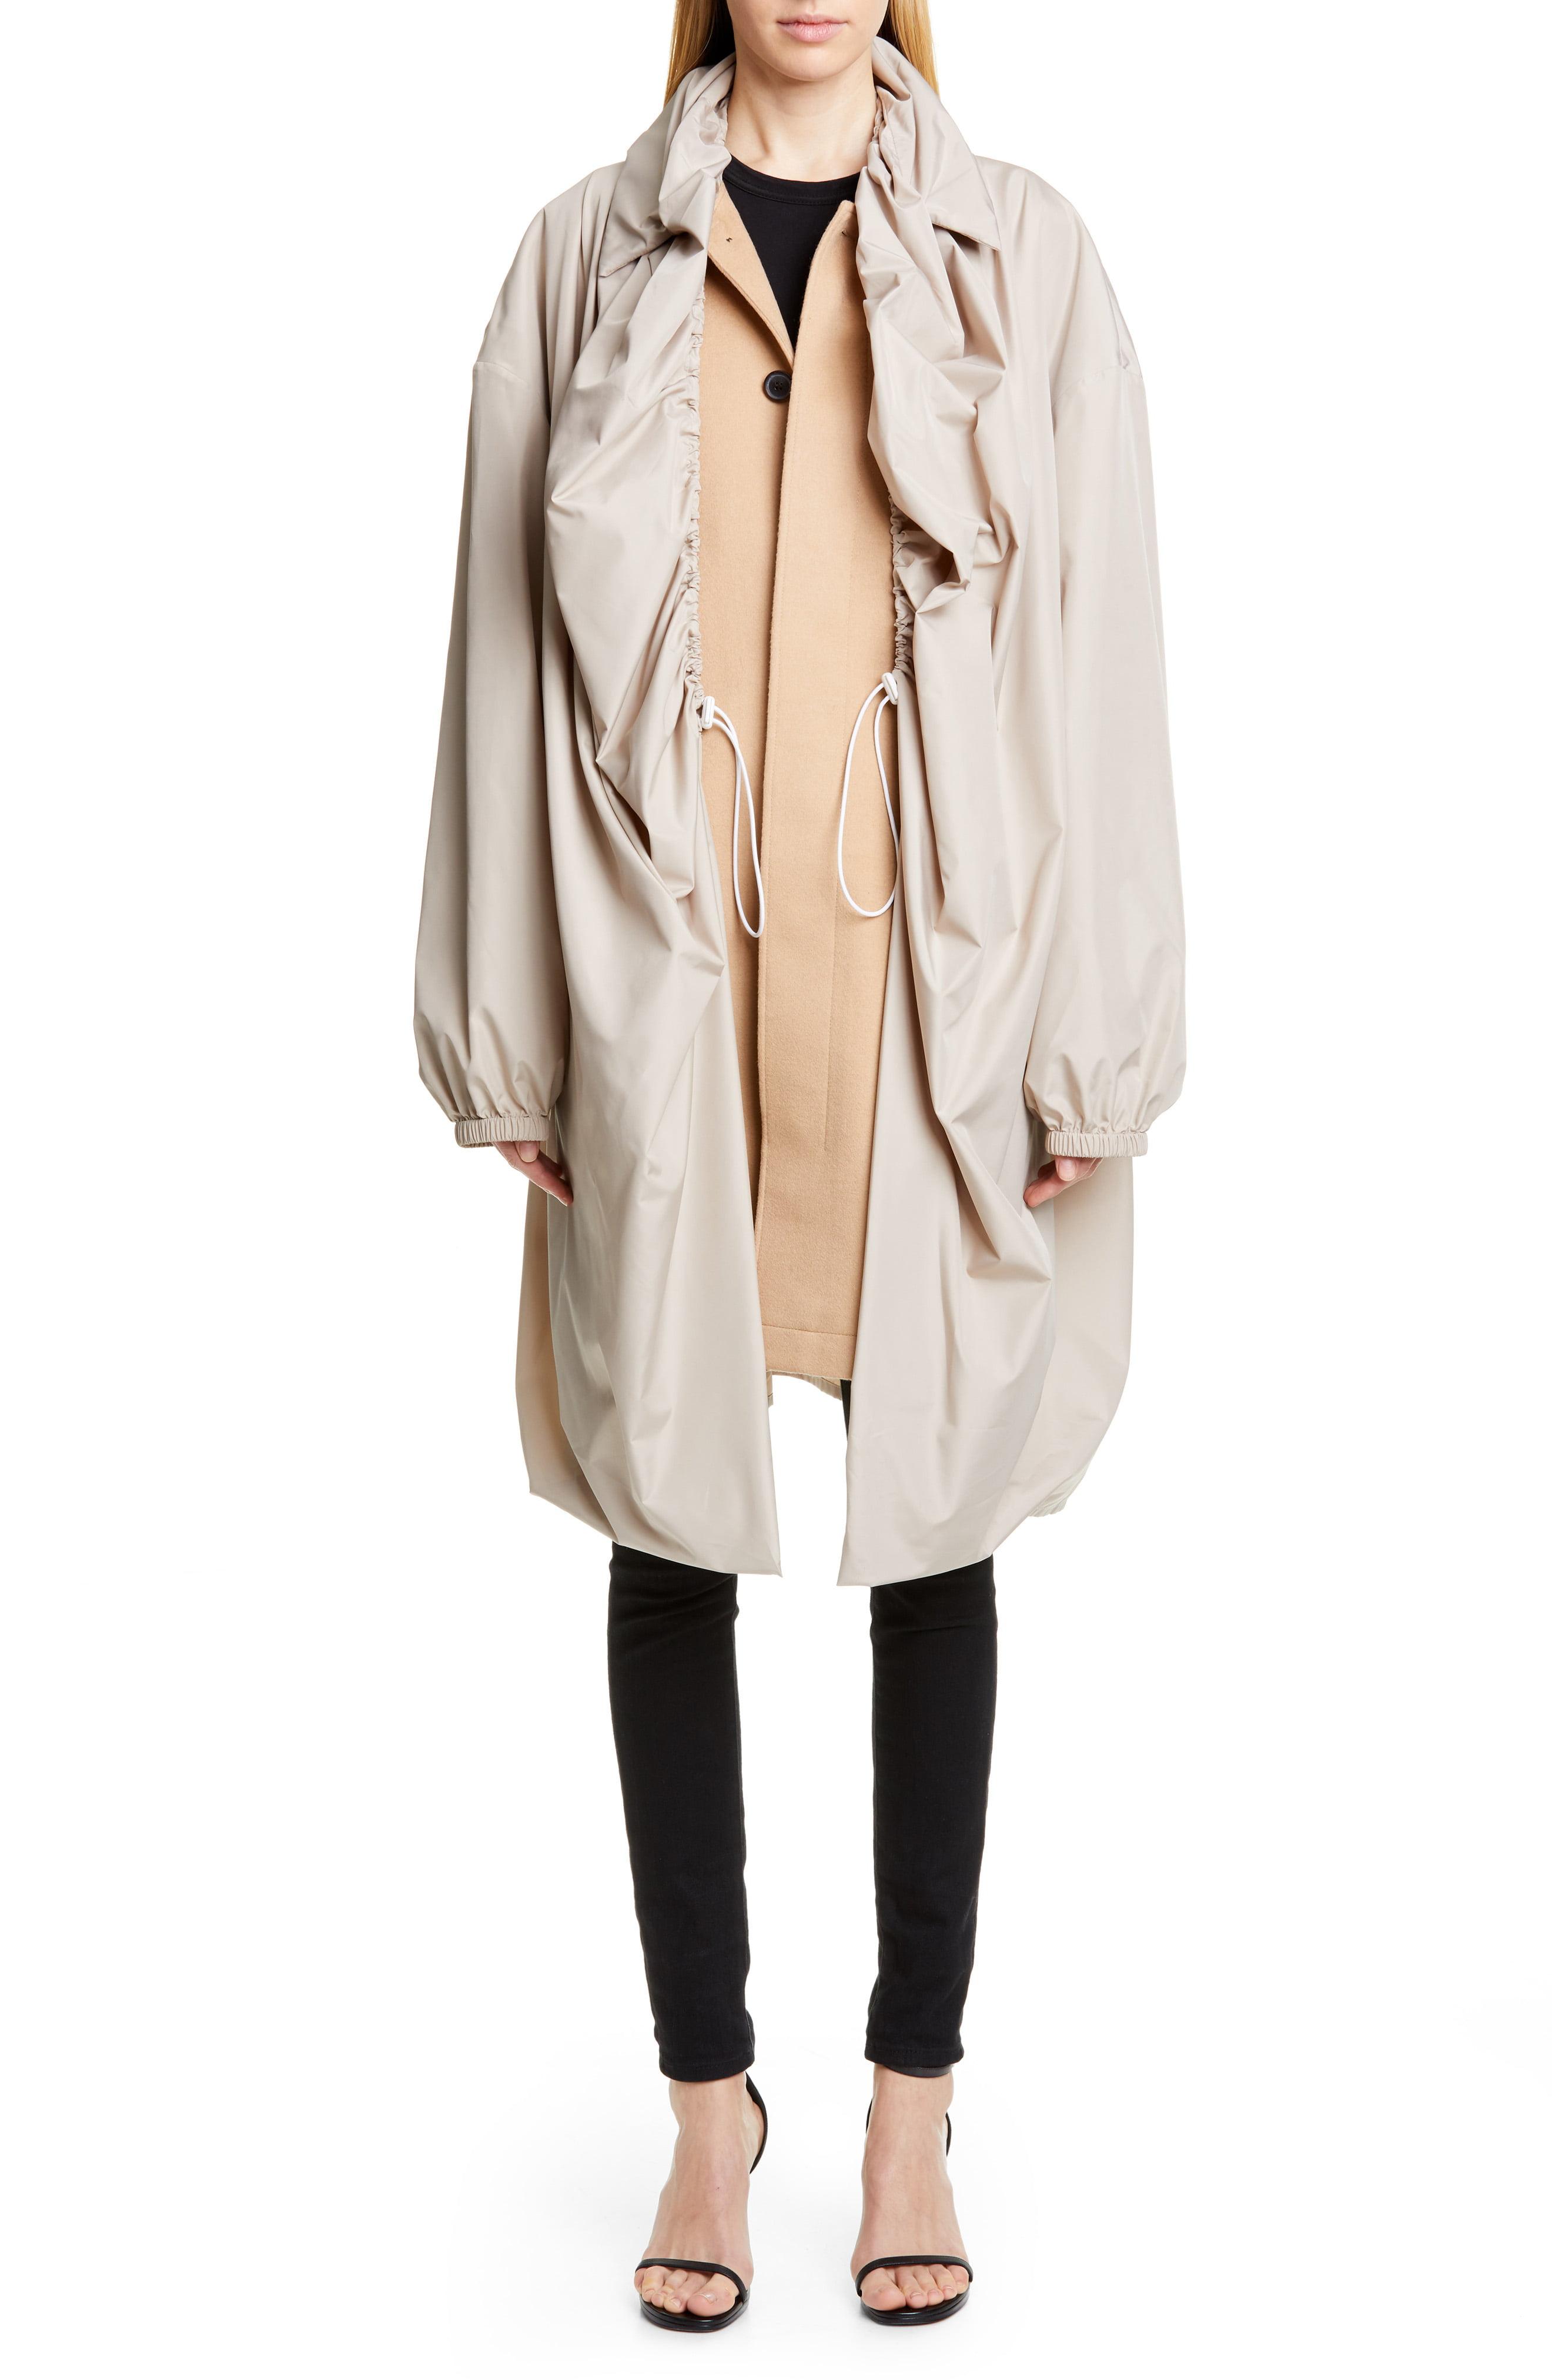 Lyst - Y. Project Layered Coat in Natural